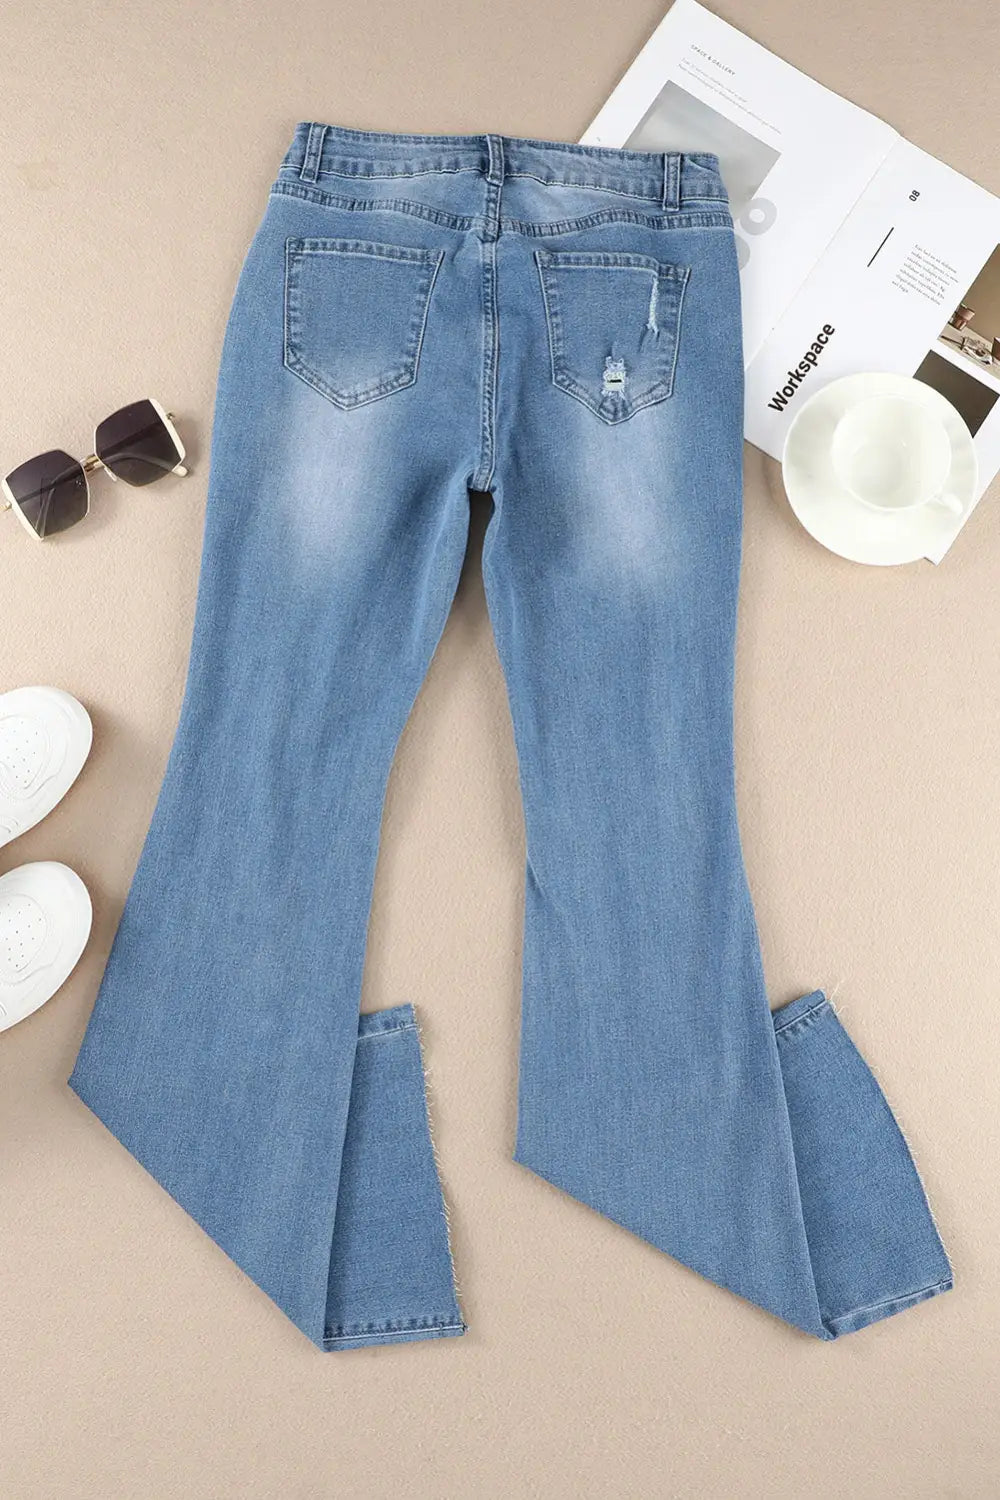 Sky blue dark wash mid rise flare jeans